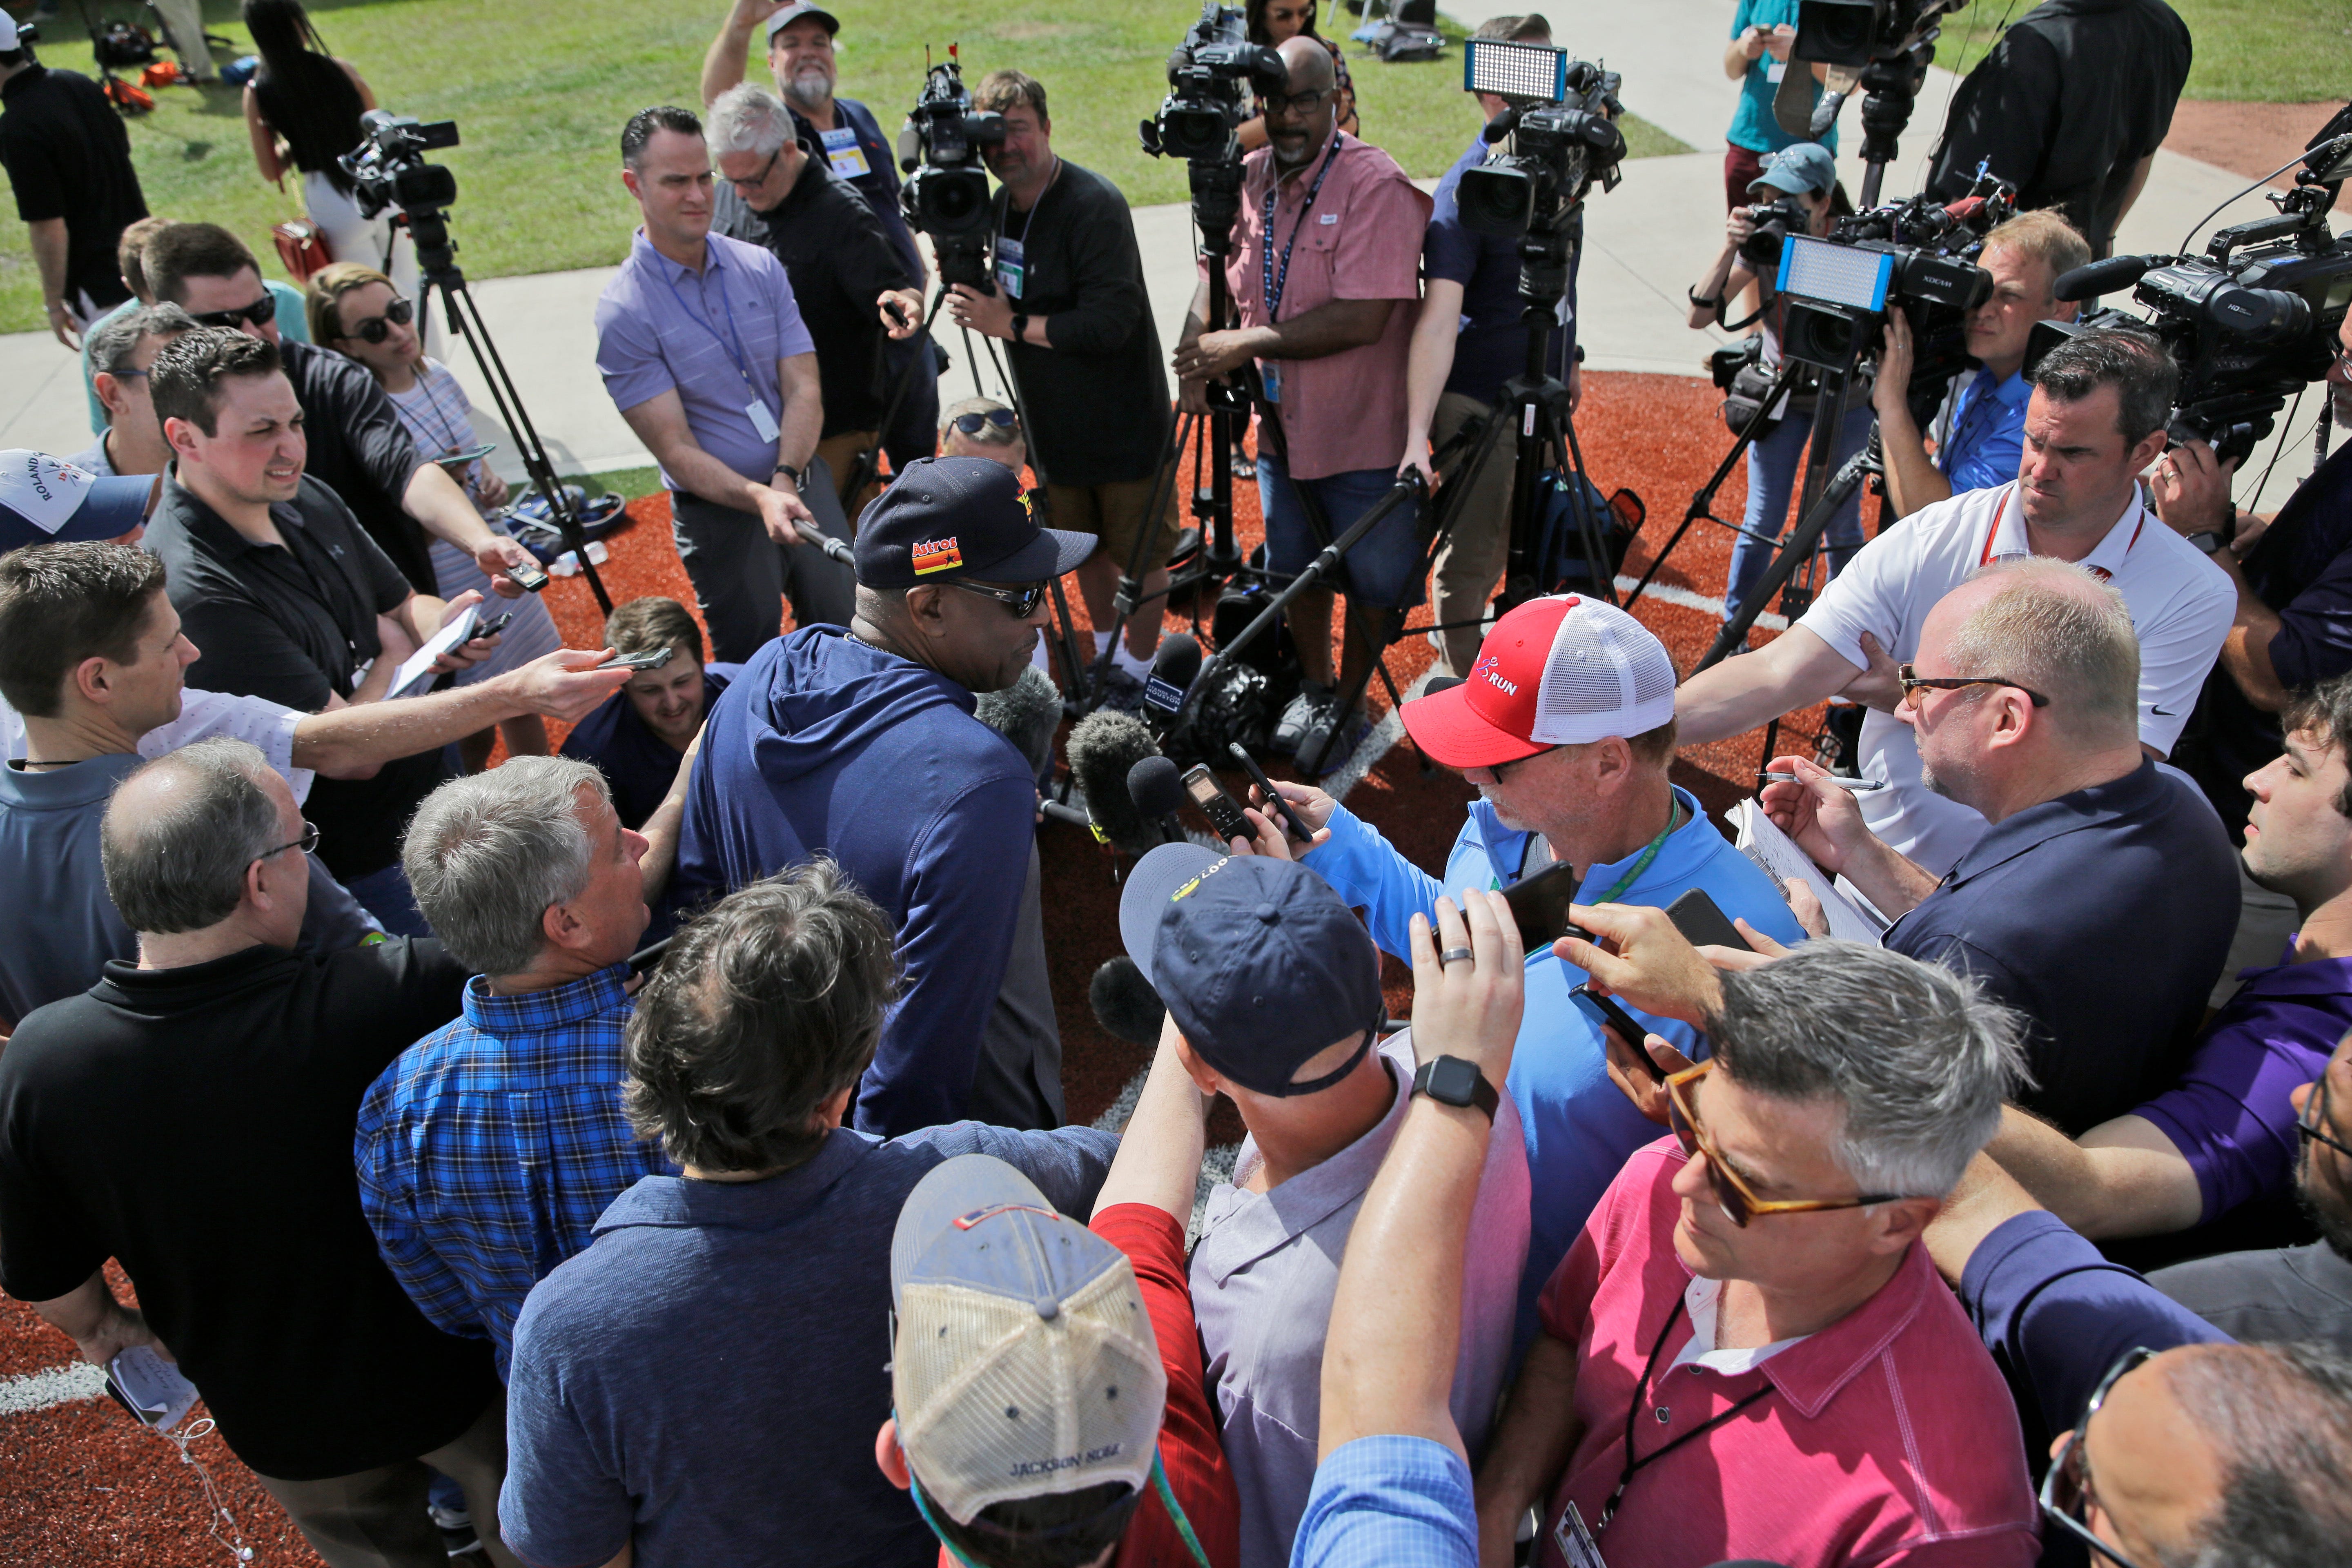 Opinion: Chaos, animosity follow Astros on first full day of training camp thanks to cheating scandal